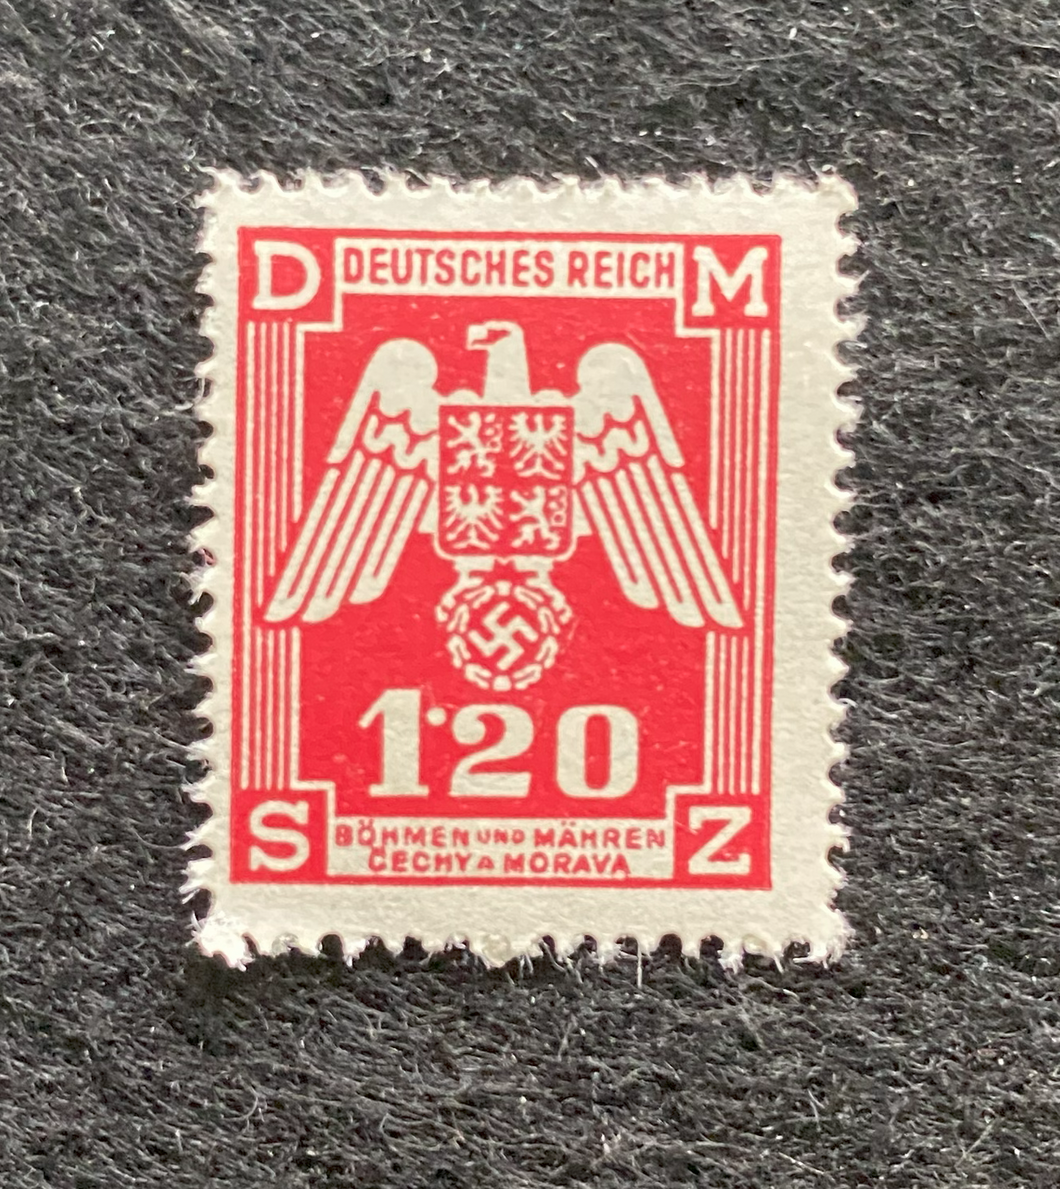 Rare Old Authentic WWII Eagle German Unused Stamp with SWASTIKA - 1.20K